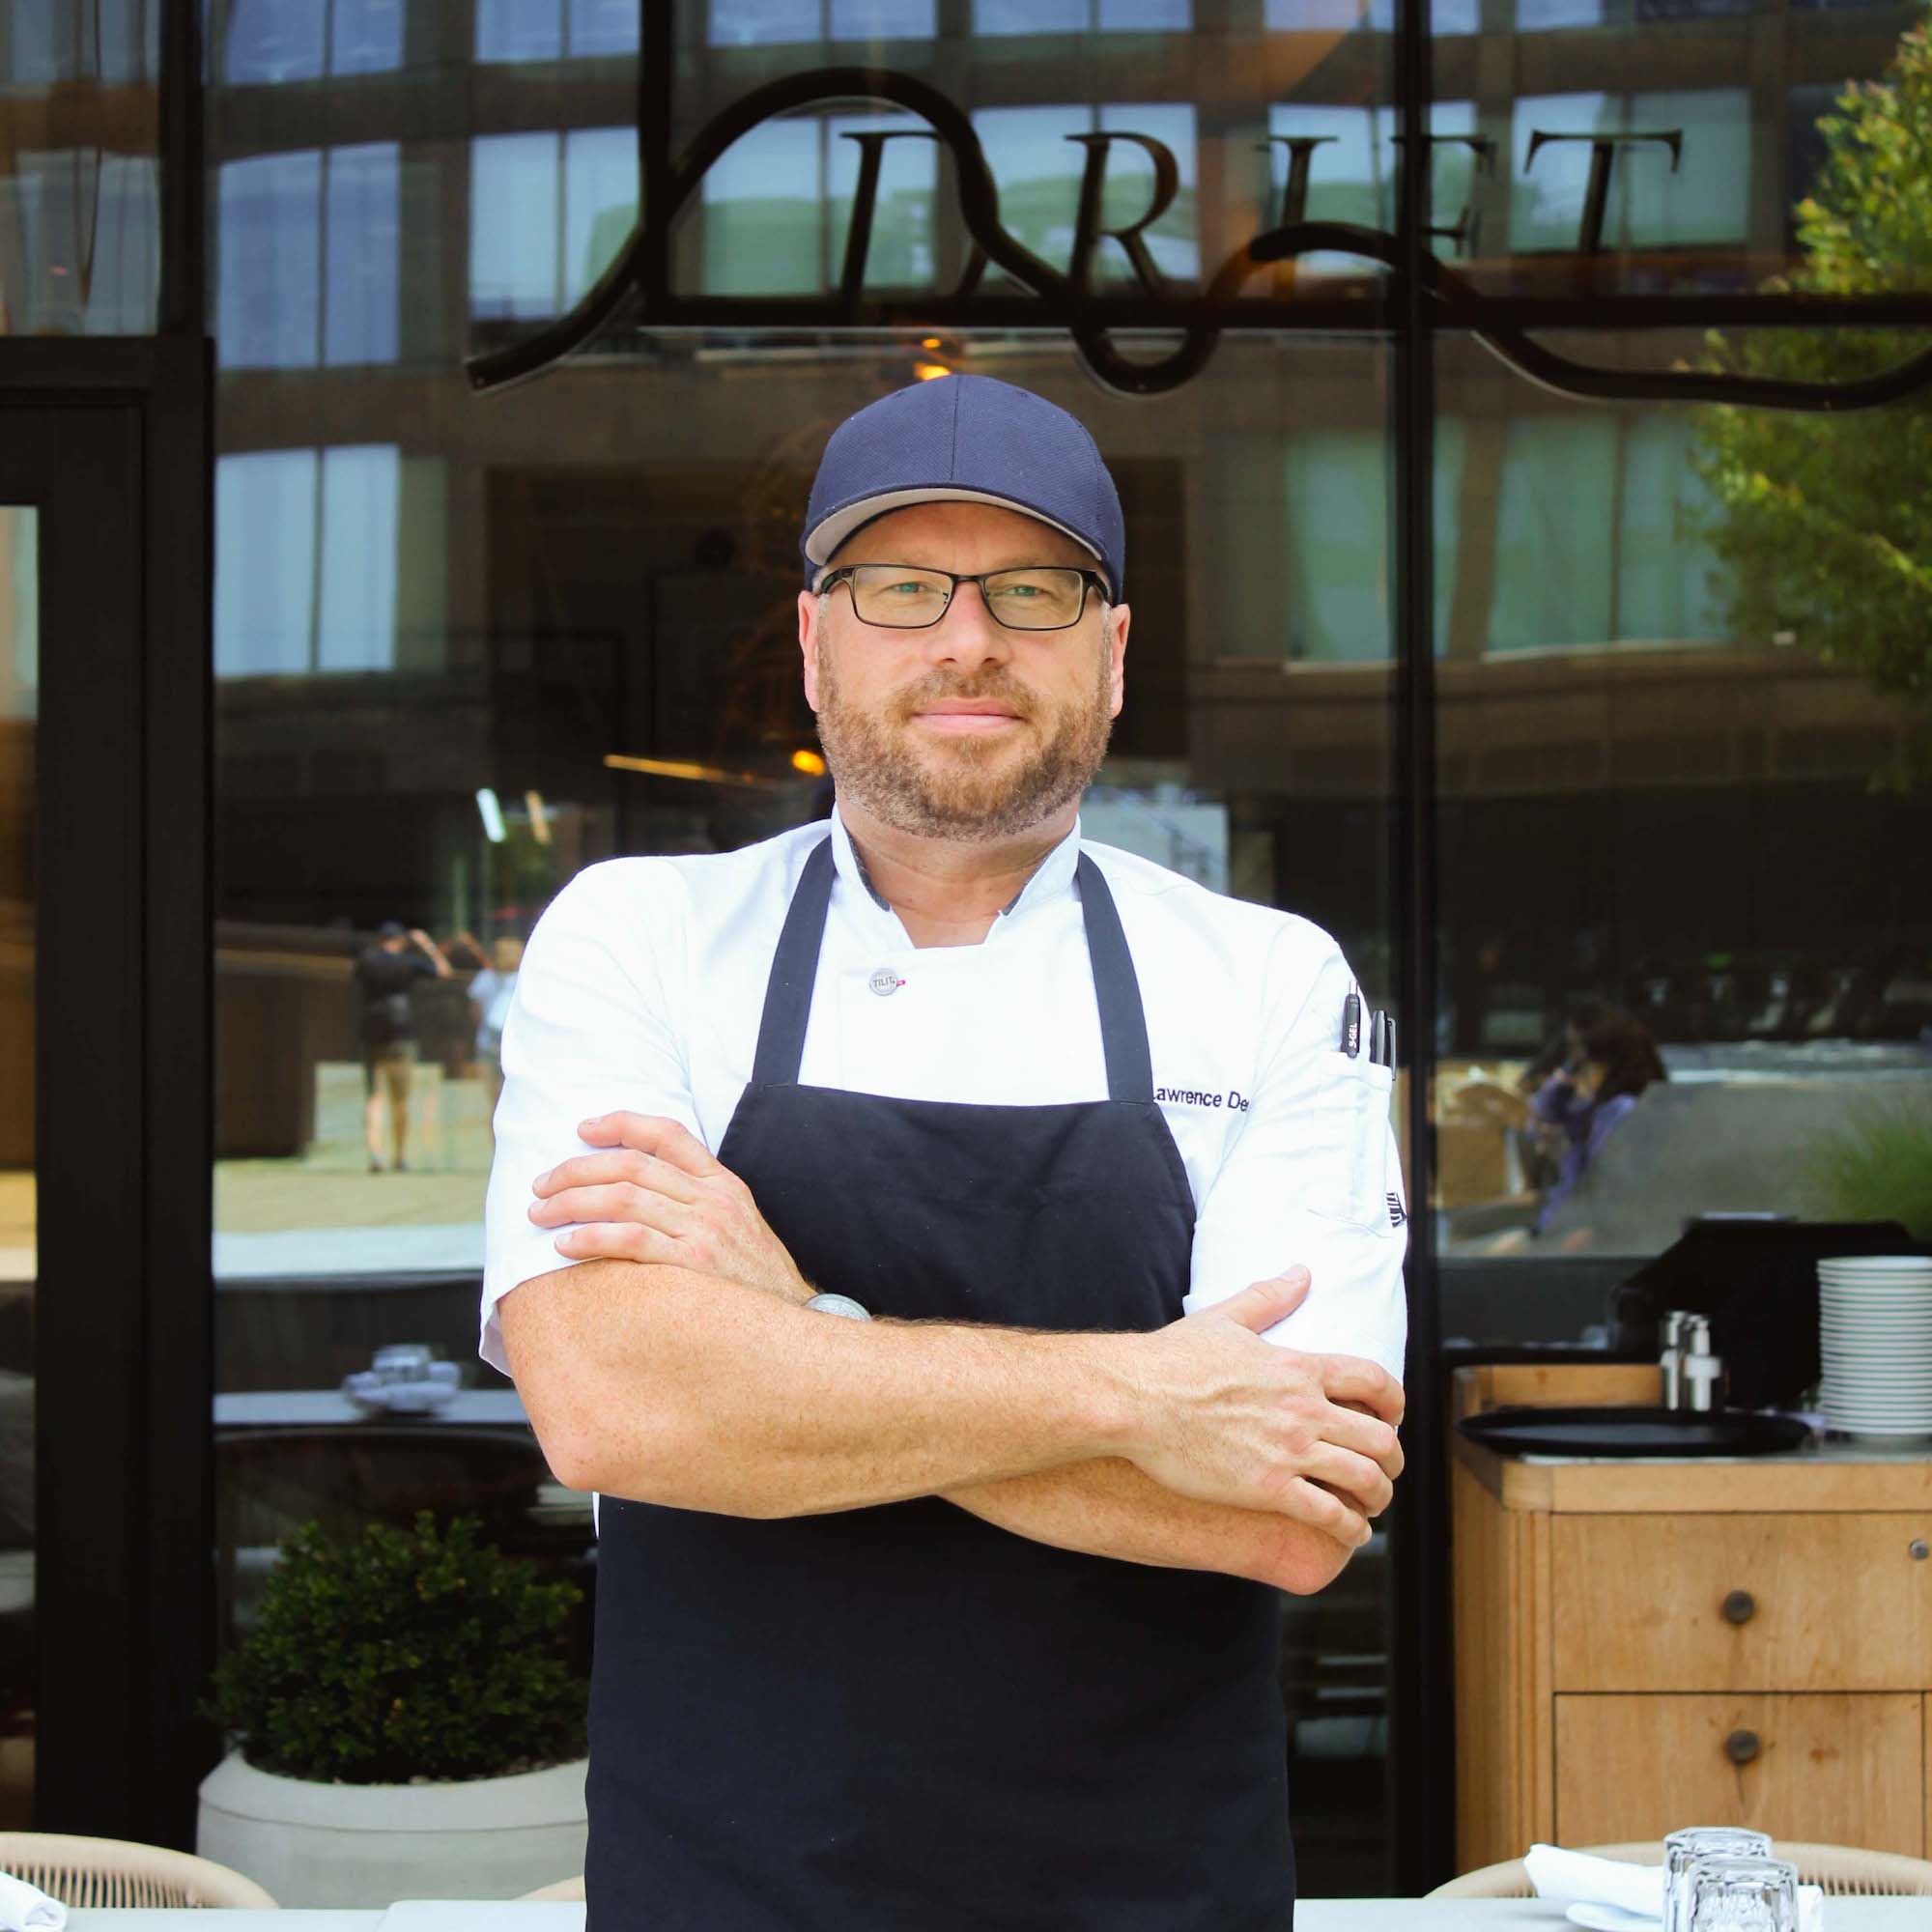 Chef Lawrence stands in front of drift restaurant